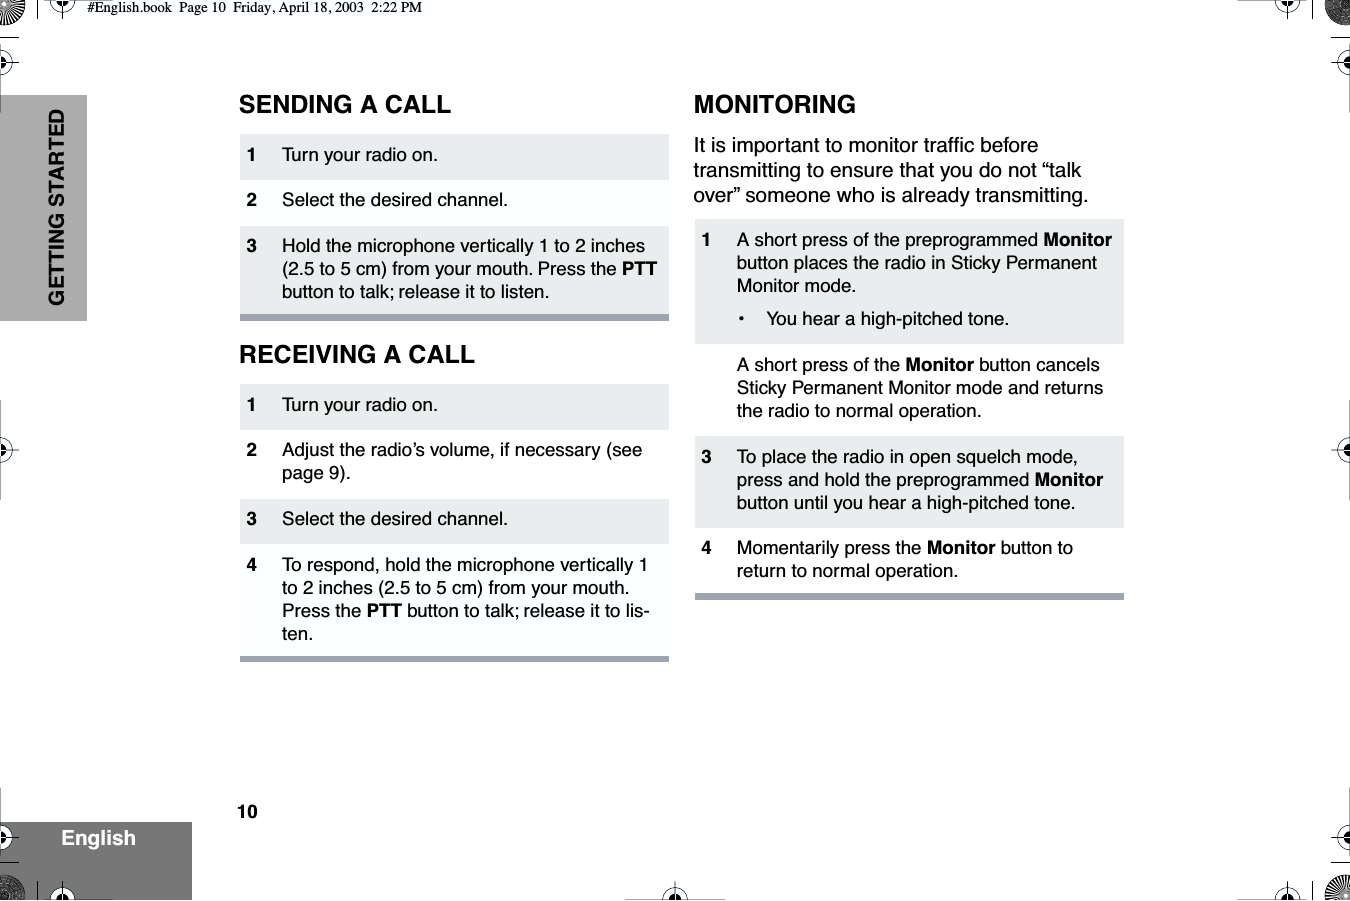  10 EnglishGETTING STARTED SENDING A CALLRECEIVING A CALLMONITORING It is important to monitor trafﬁc before transmitting to ensure that you do not “talk over” someone who is already transmitting. 1 Tu rn your radio on. 2 Select the desired channel. 3 Hold the microphone vertically 1 to 2 inches (2.5 to 5 cm) from your mouth. Press the  PTT  button to talk; release it to listen. 1 Tu rn your radio on. 2 Adjust the radio’s volume, if necessary (see page 9). 3 Select the desired channel.  4 To  respond, hold the microphone vertically 1 to 2 inches (2.5 to 5 cm) from your mouth. Press the  PTT  button to talk; release it to lis-ten. 1 A short press of the preprogrammed  Monitor  button places the radio in Sticky Permanent Monitor mode.•You hear a high-pitched tone.A short press of the  Monitor  button cancels Sticky Permanent Monitor mode and returns the radio to normal operation. 3 To  place the radio in open squelch mode, press and hold the preprogrammed  Monitor  button until you hear a high-pitched tone. 4 Momentarily press the  Monitor  button to return to normal operation. #English.book  Page 10  Friday, April 18, 2003  2:22 PM